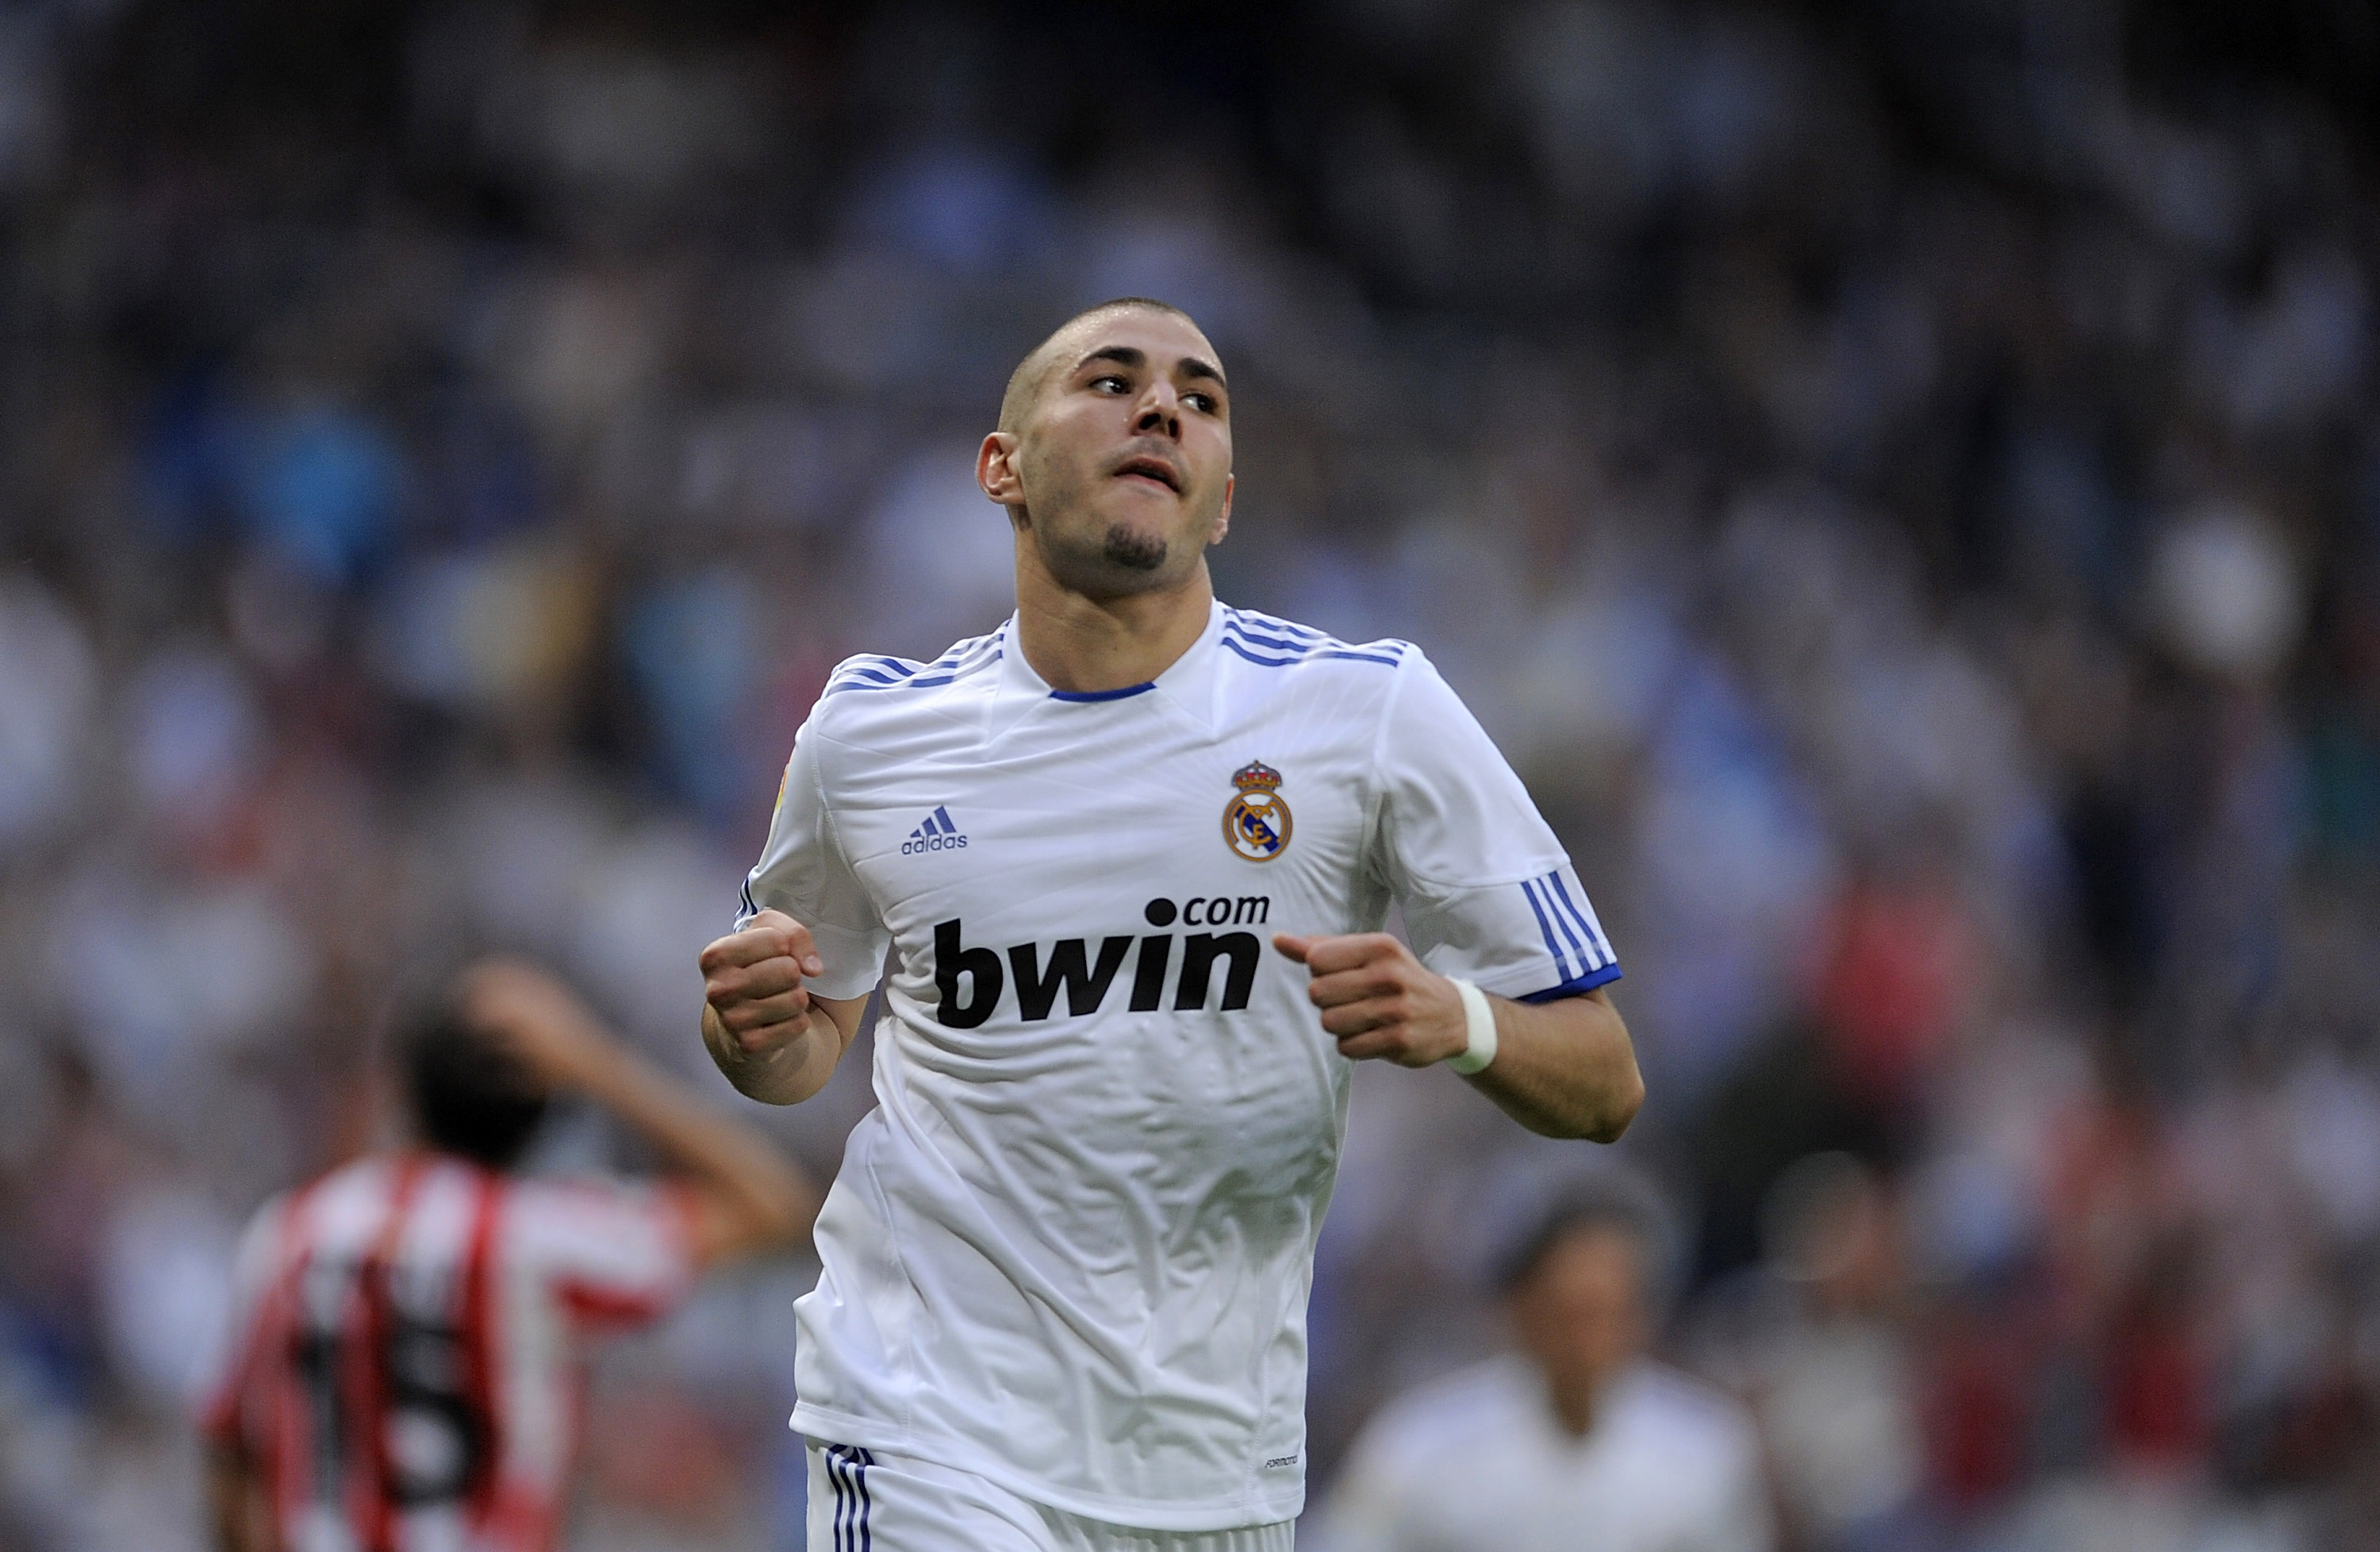 MADRID, SPAIN - MAY 21:  Karim Benzema of Real Madrid celebrates after scoring Real's third goal during the La Liga match between Real Madrid and UD Almeria at Estadio Santiago Bernabeu on May 21, 2011 in Madrid, Spain.  (Photo by Denis Doyle/Getty Images